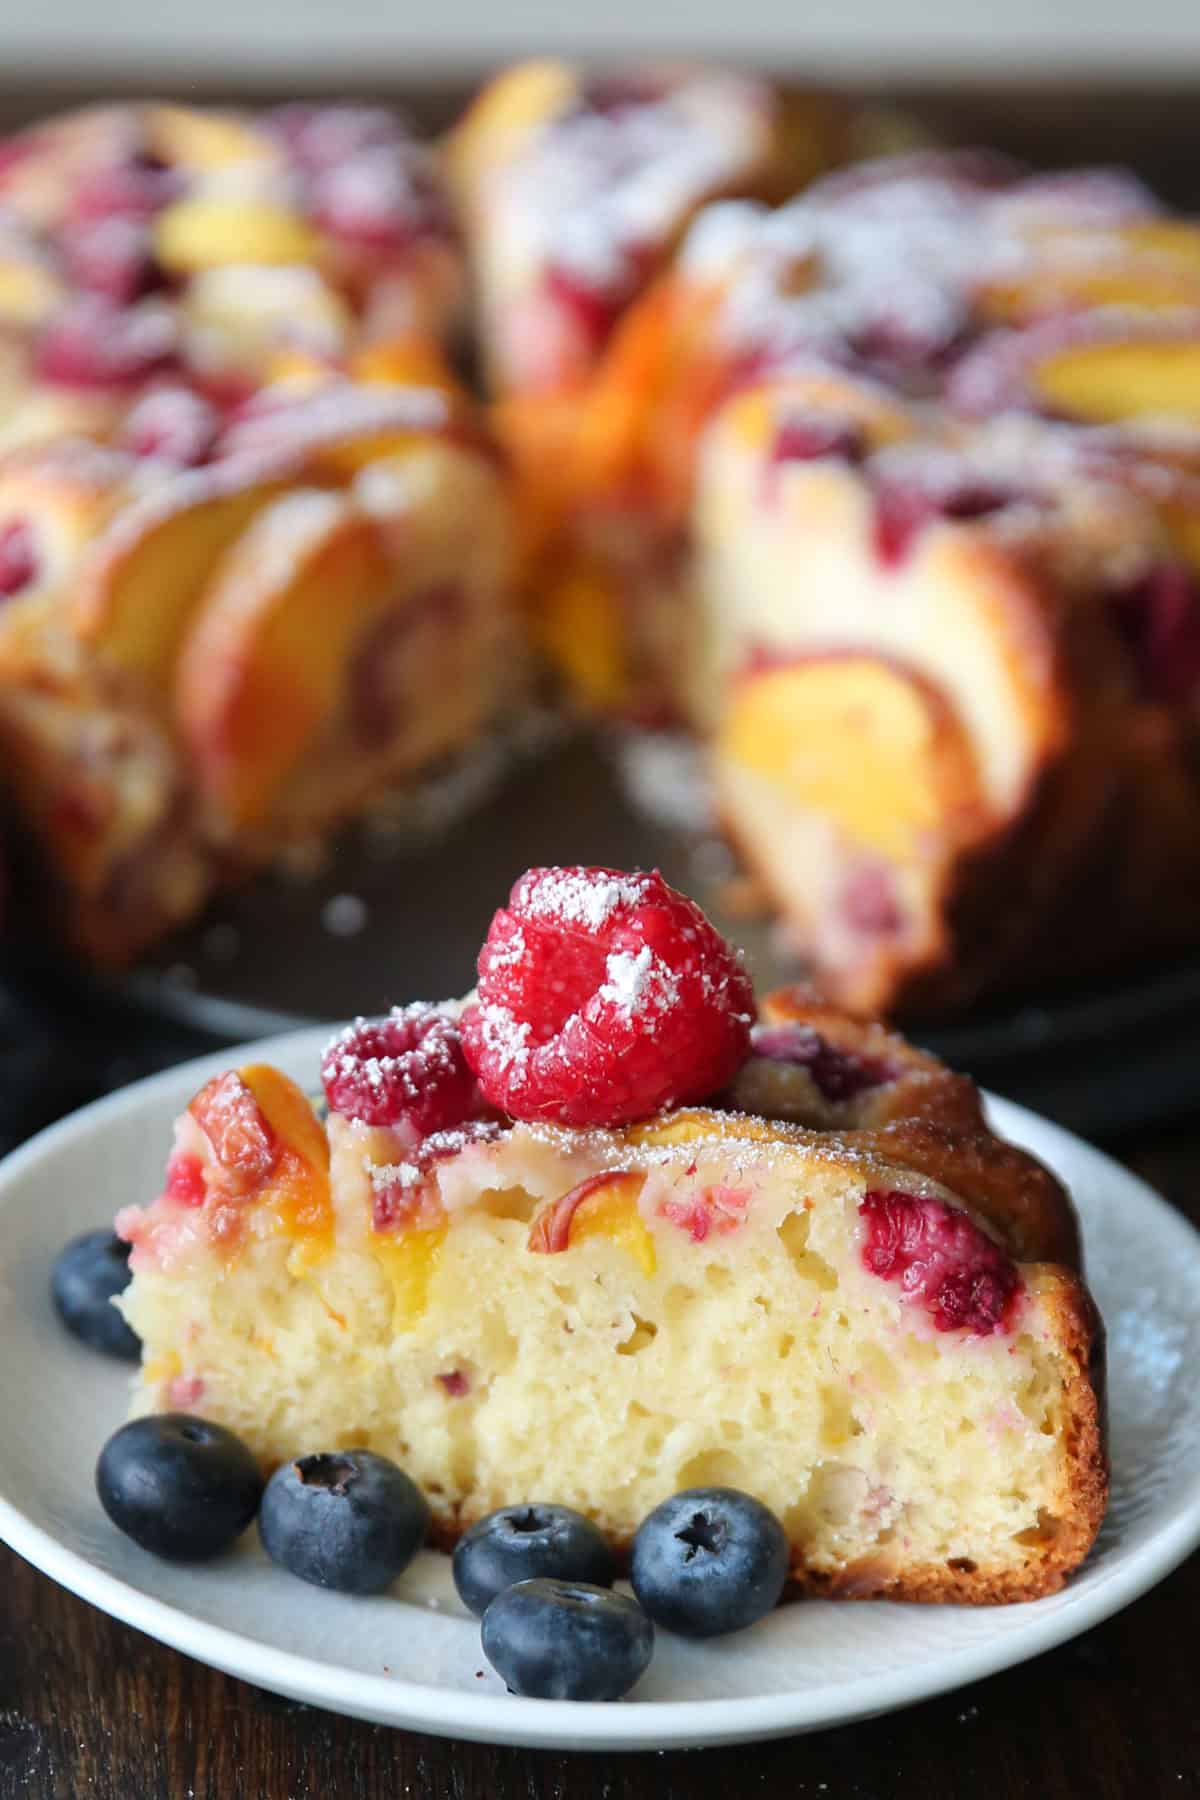 a slice of raspberry peach cake on a plate, with the whole cake in the background.